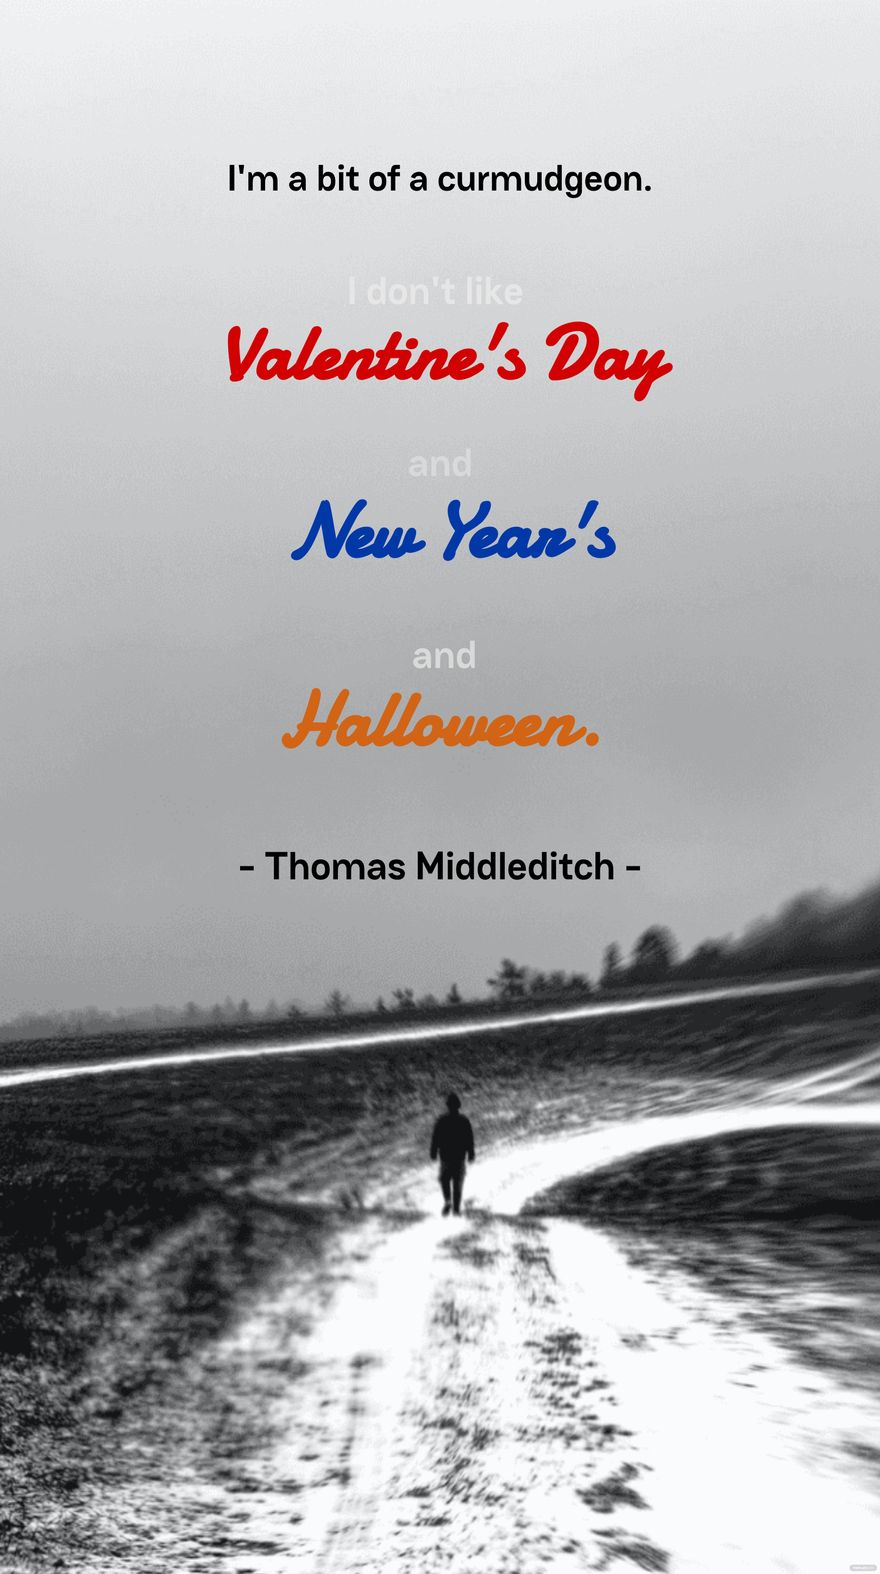 Thomas Middleditch - I'm a bit of a curmudgeon. I don't like Valentine's Day and New Year's and Halloween. in JPG